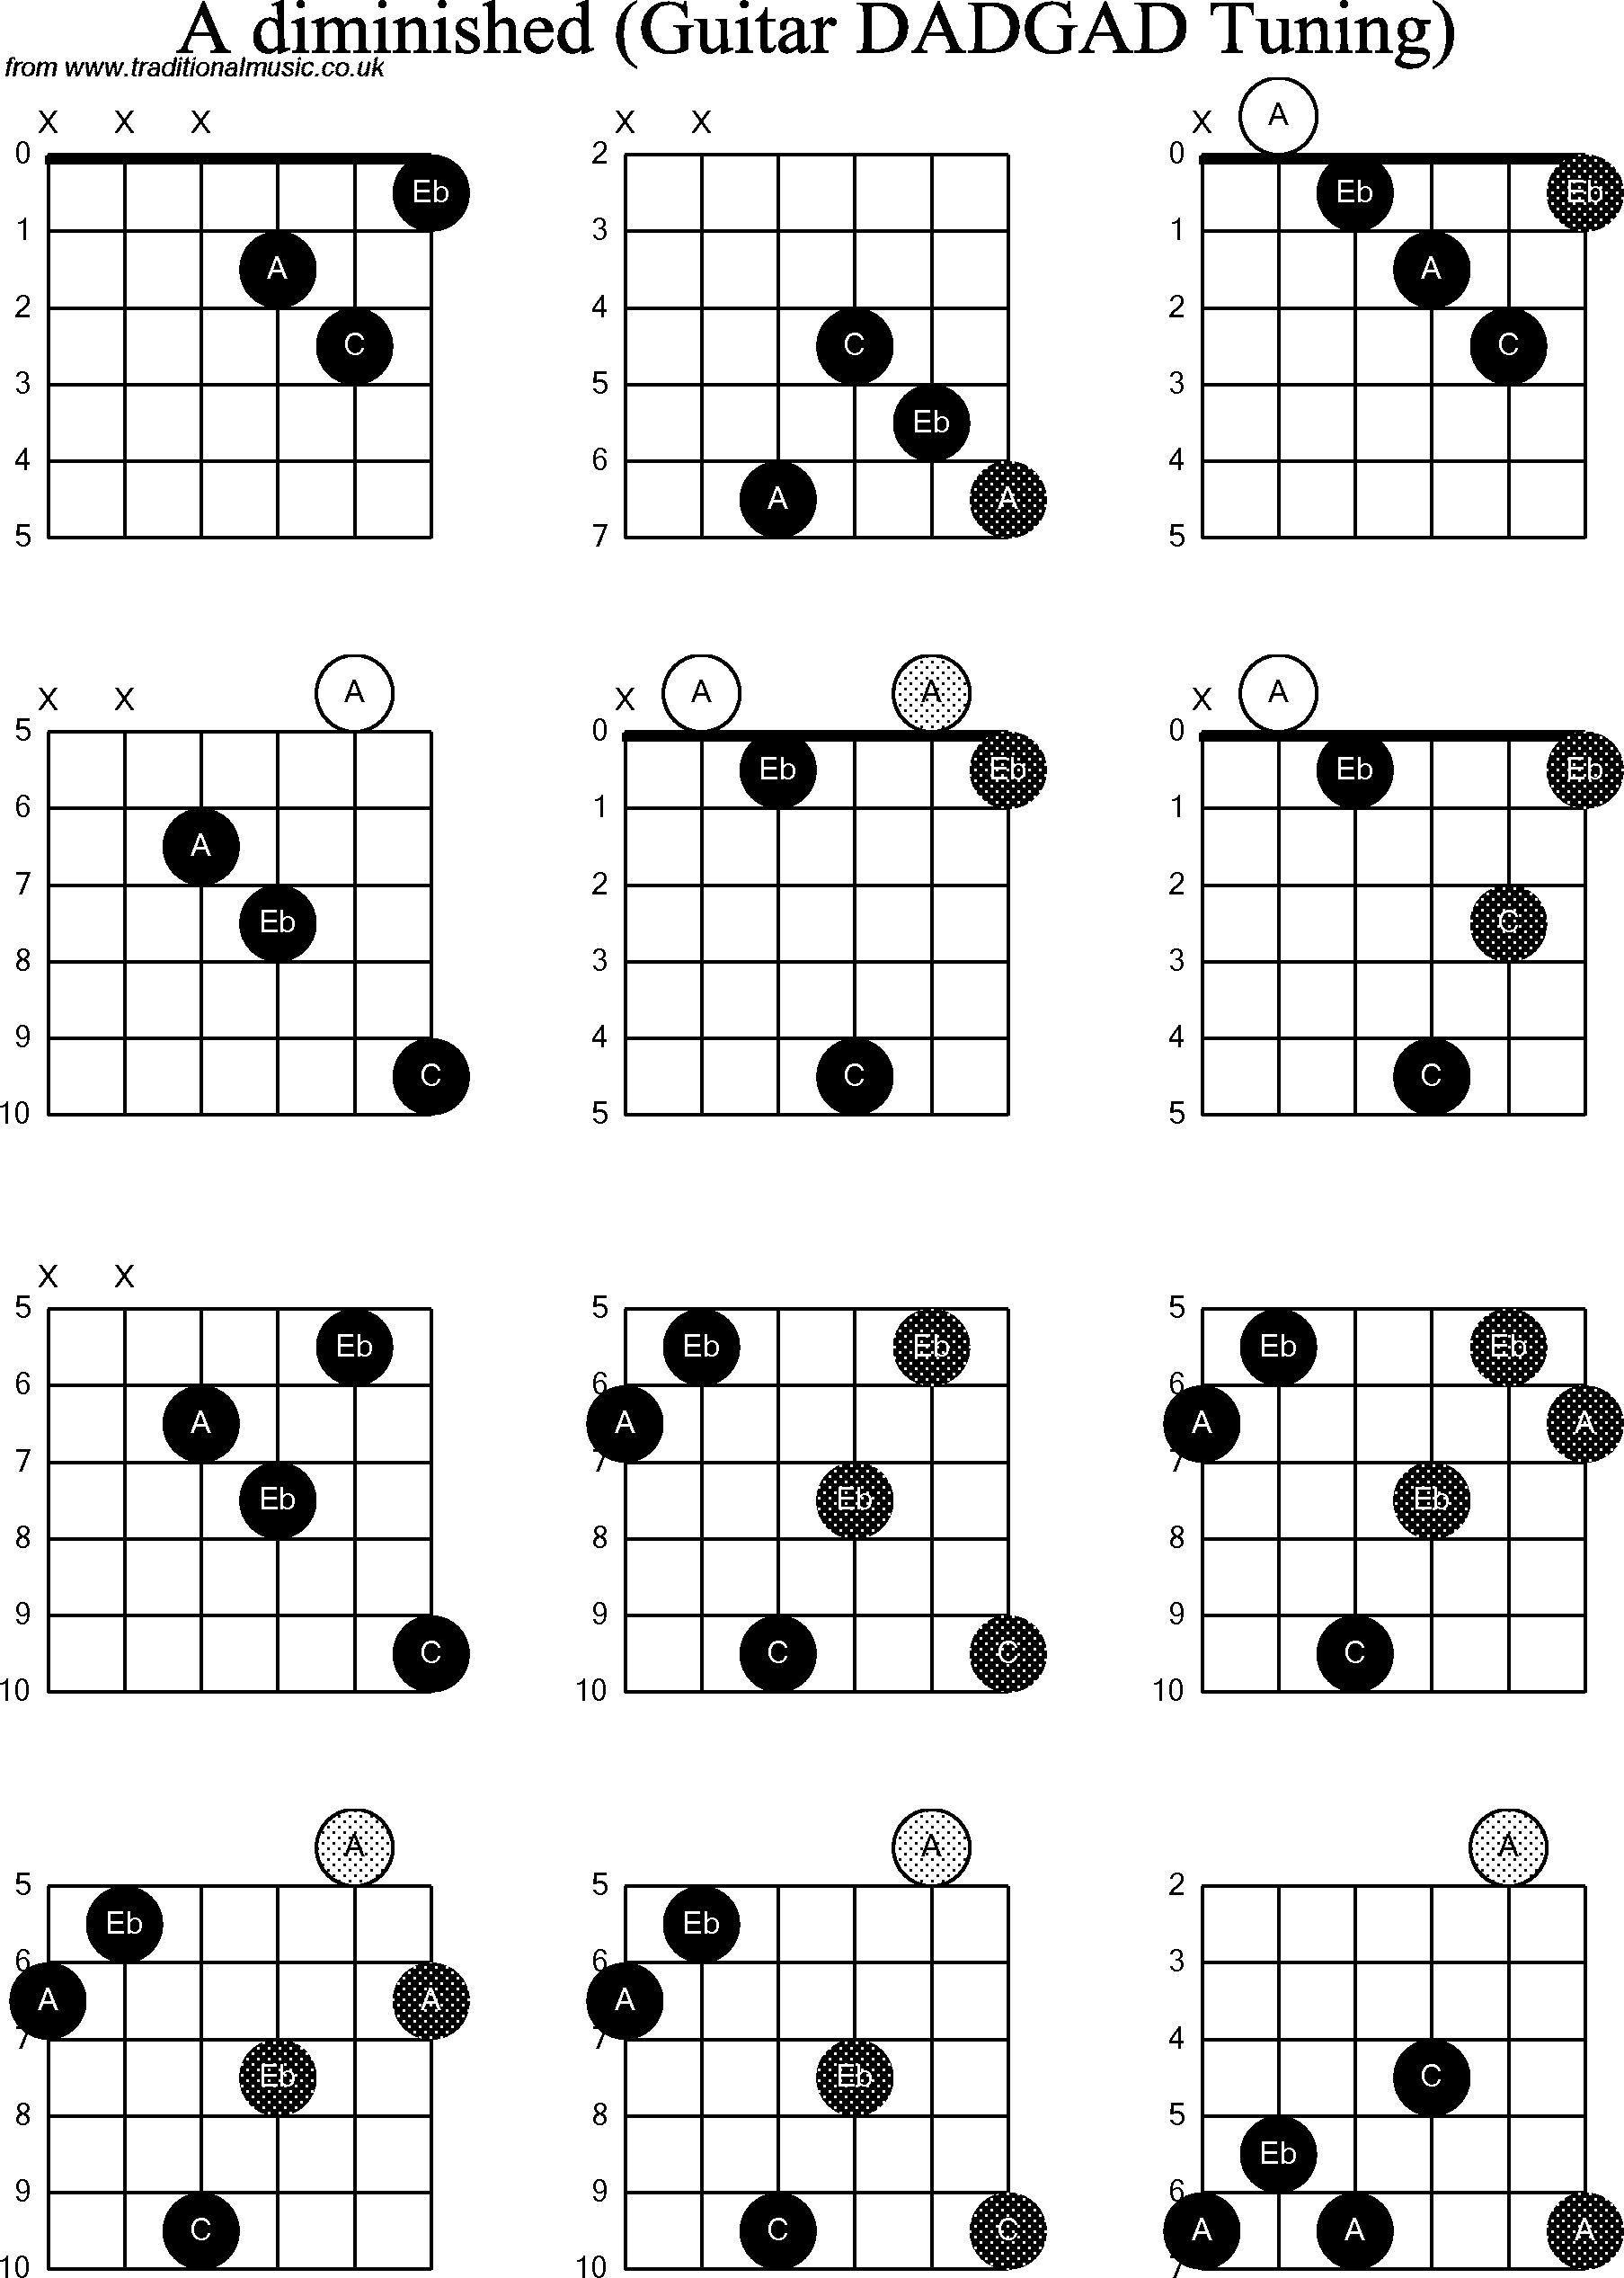 Chord Diagrams for D Modal Guitar(DADGAD), A Diminished